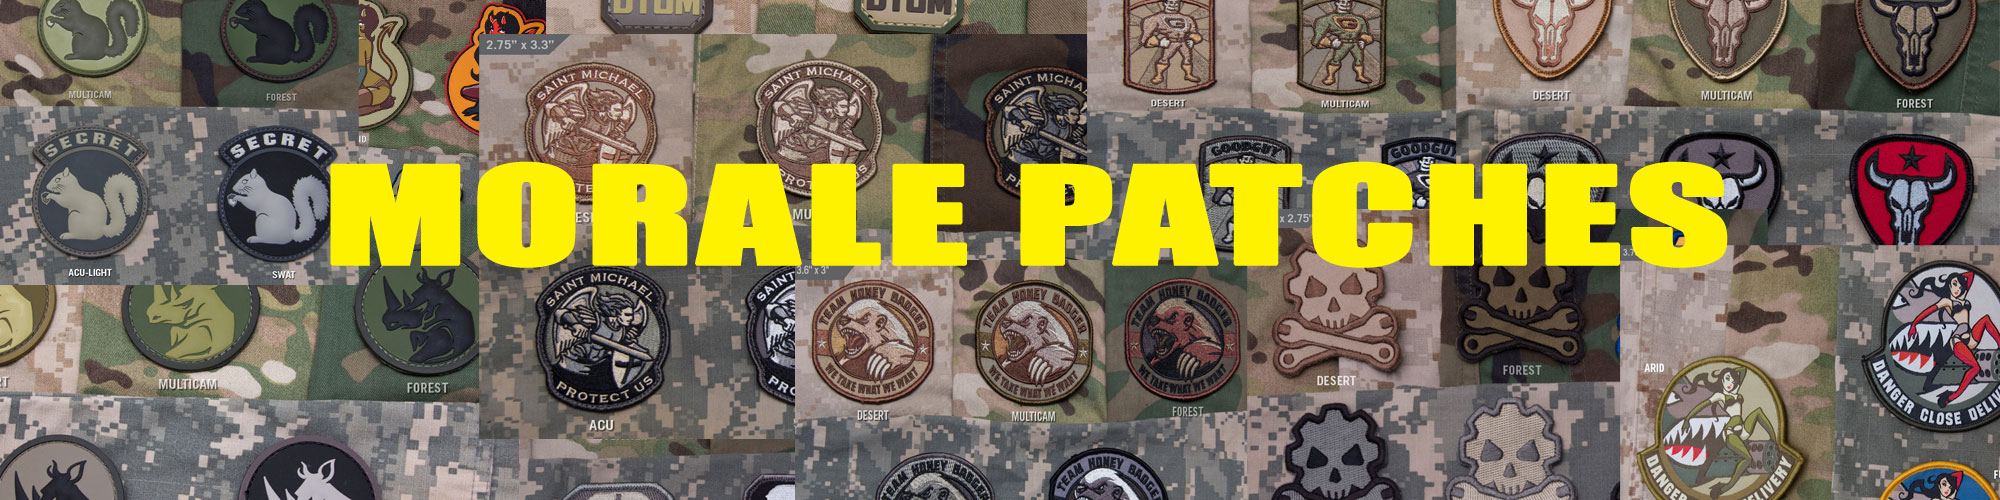 POCO Military and Outdoor Supplies banner 2